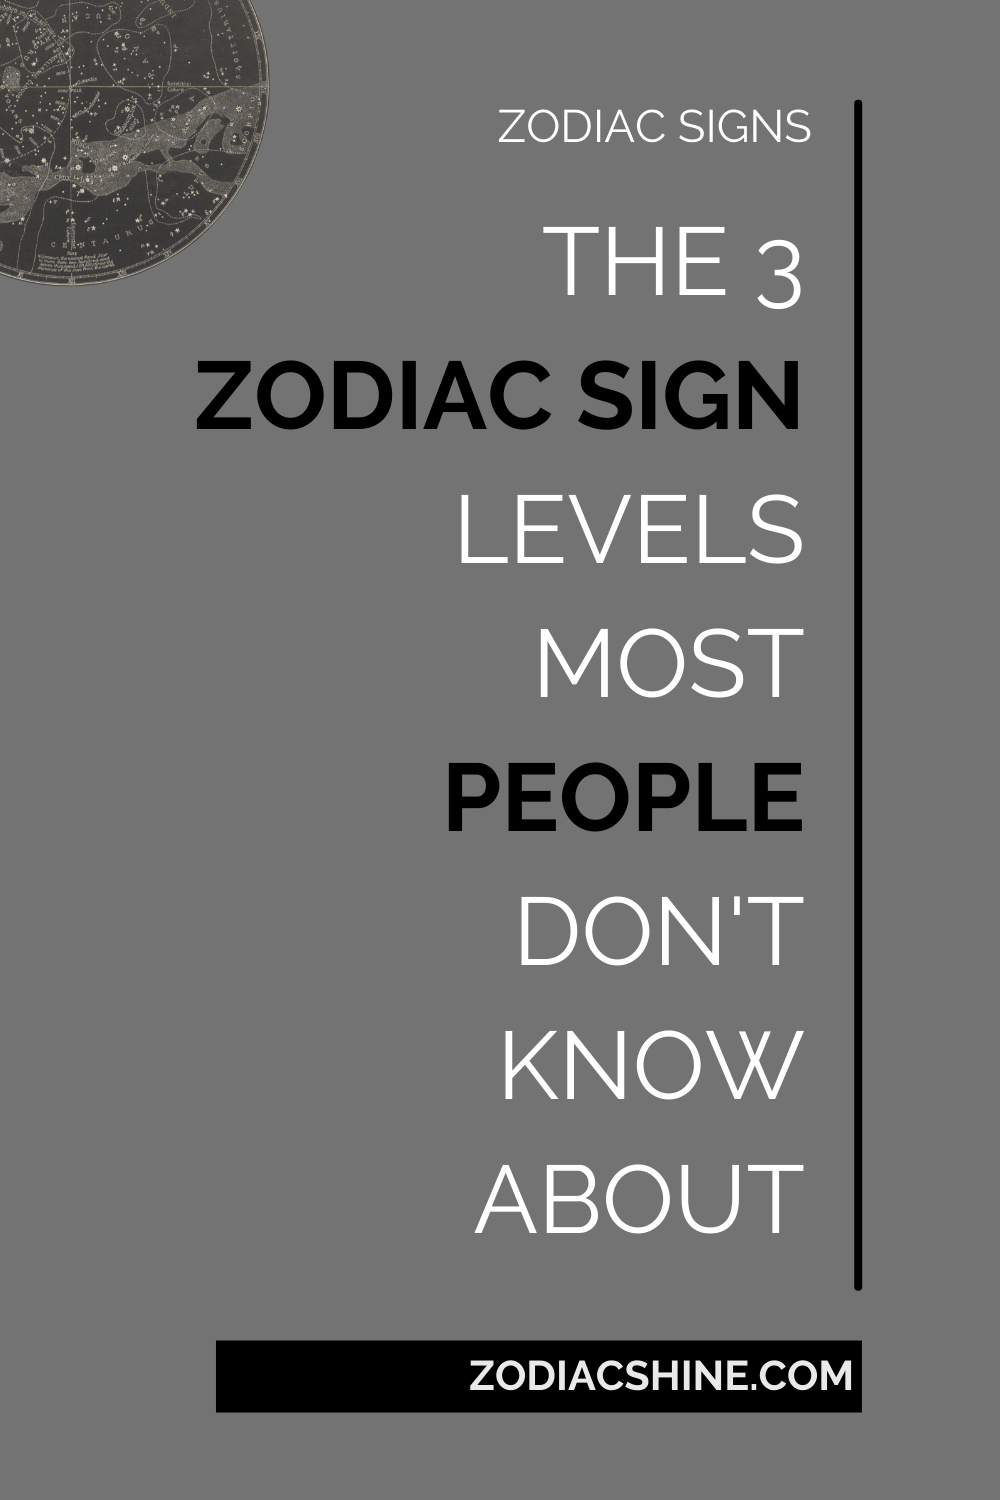 The 3 Zodiac Sign Levels Most People Don't Know About